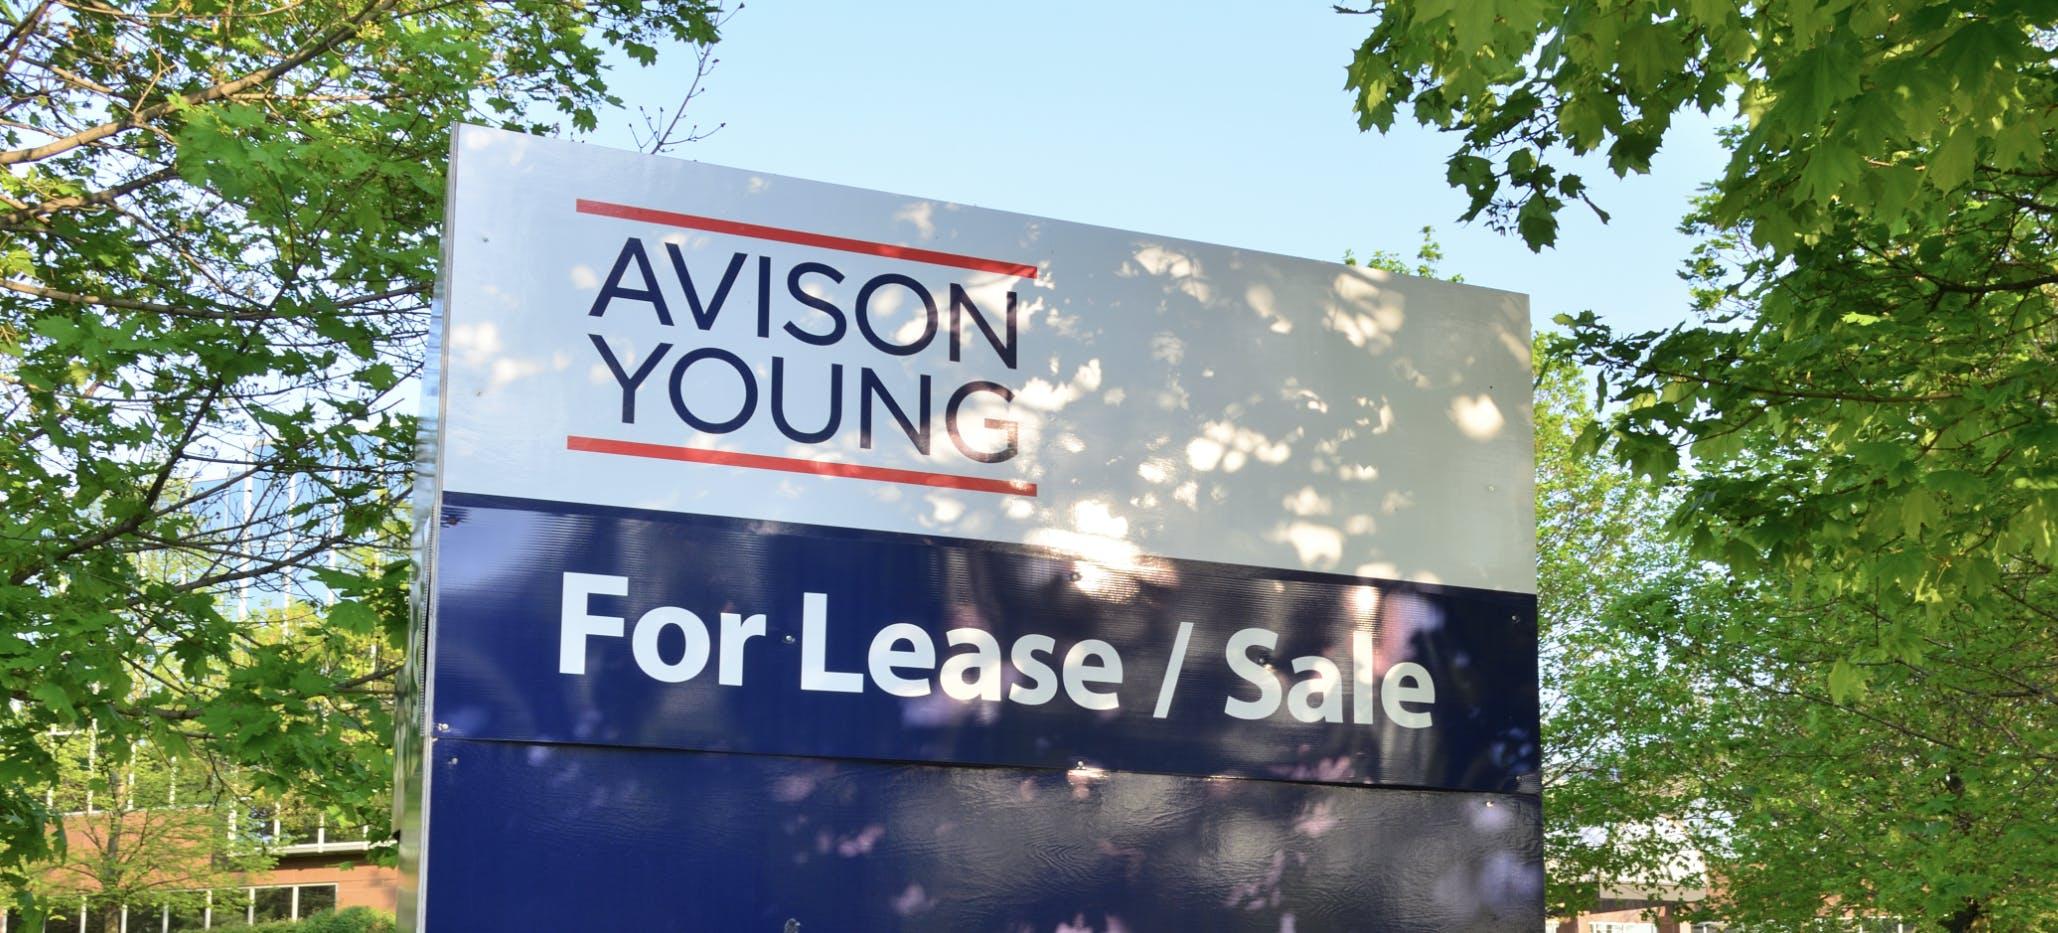 Avison Young searches for solutions as downgrade clouds refi picture